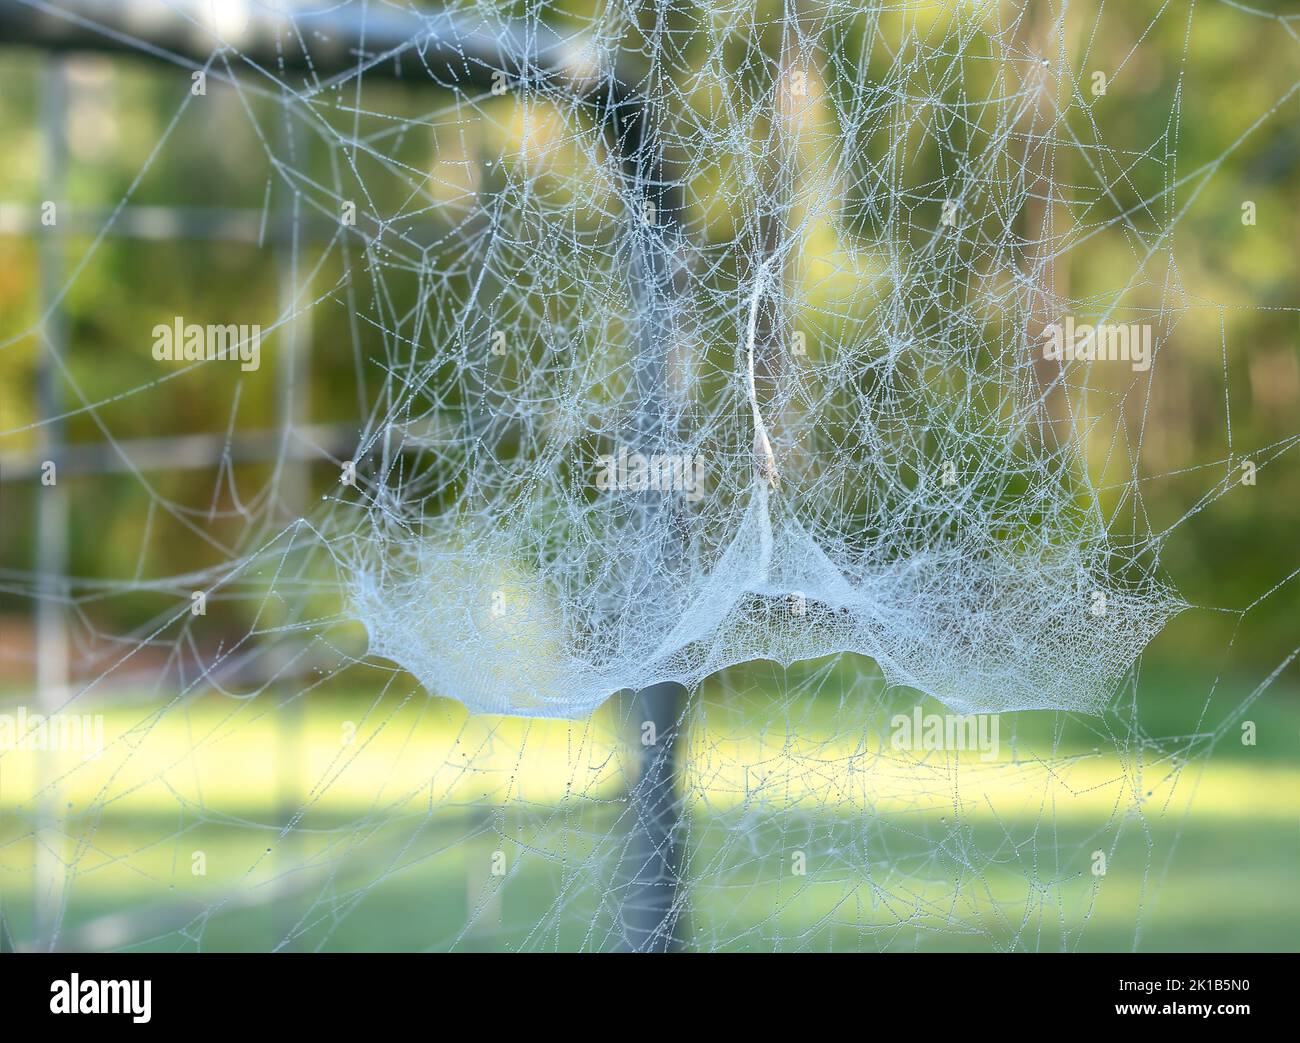 Intricate detail of a delicate spider web covered in early morning dewdrops looking like strings of pearls. Stock Photo